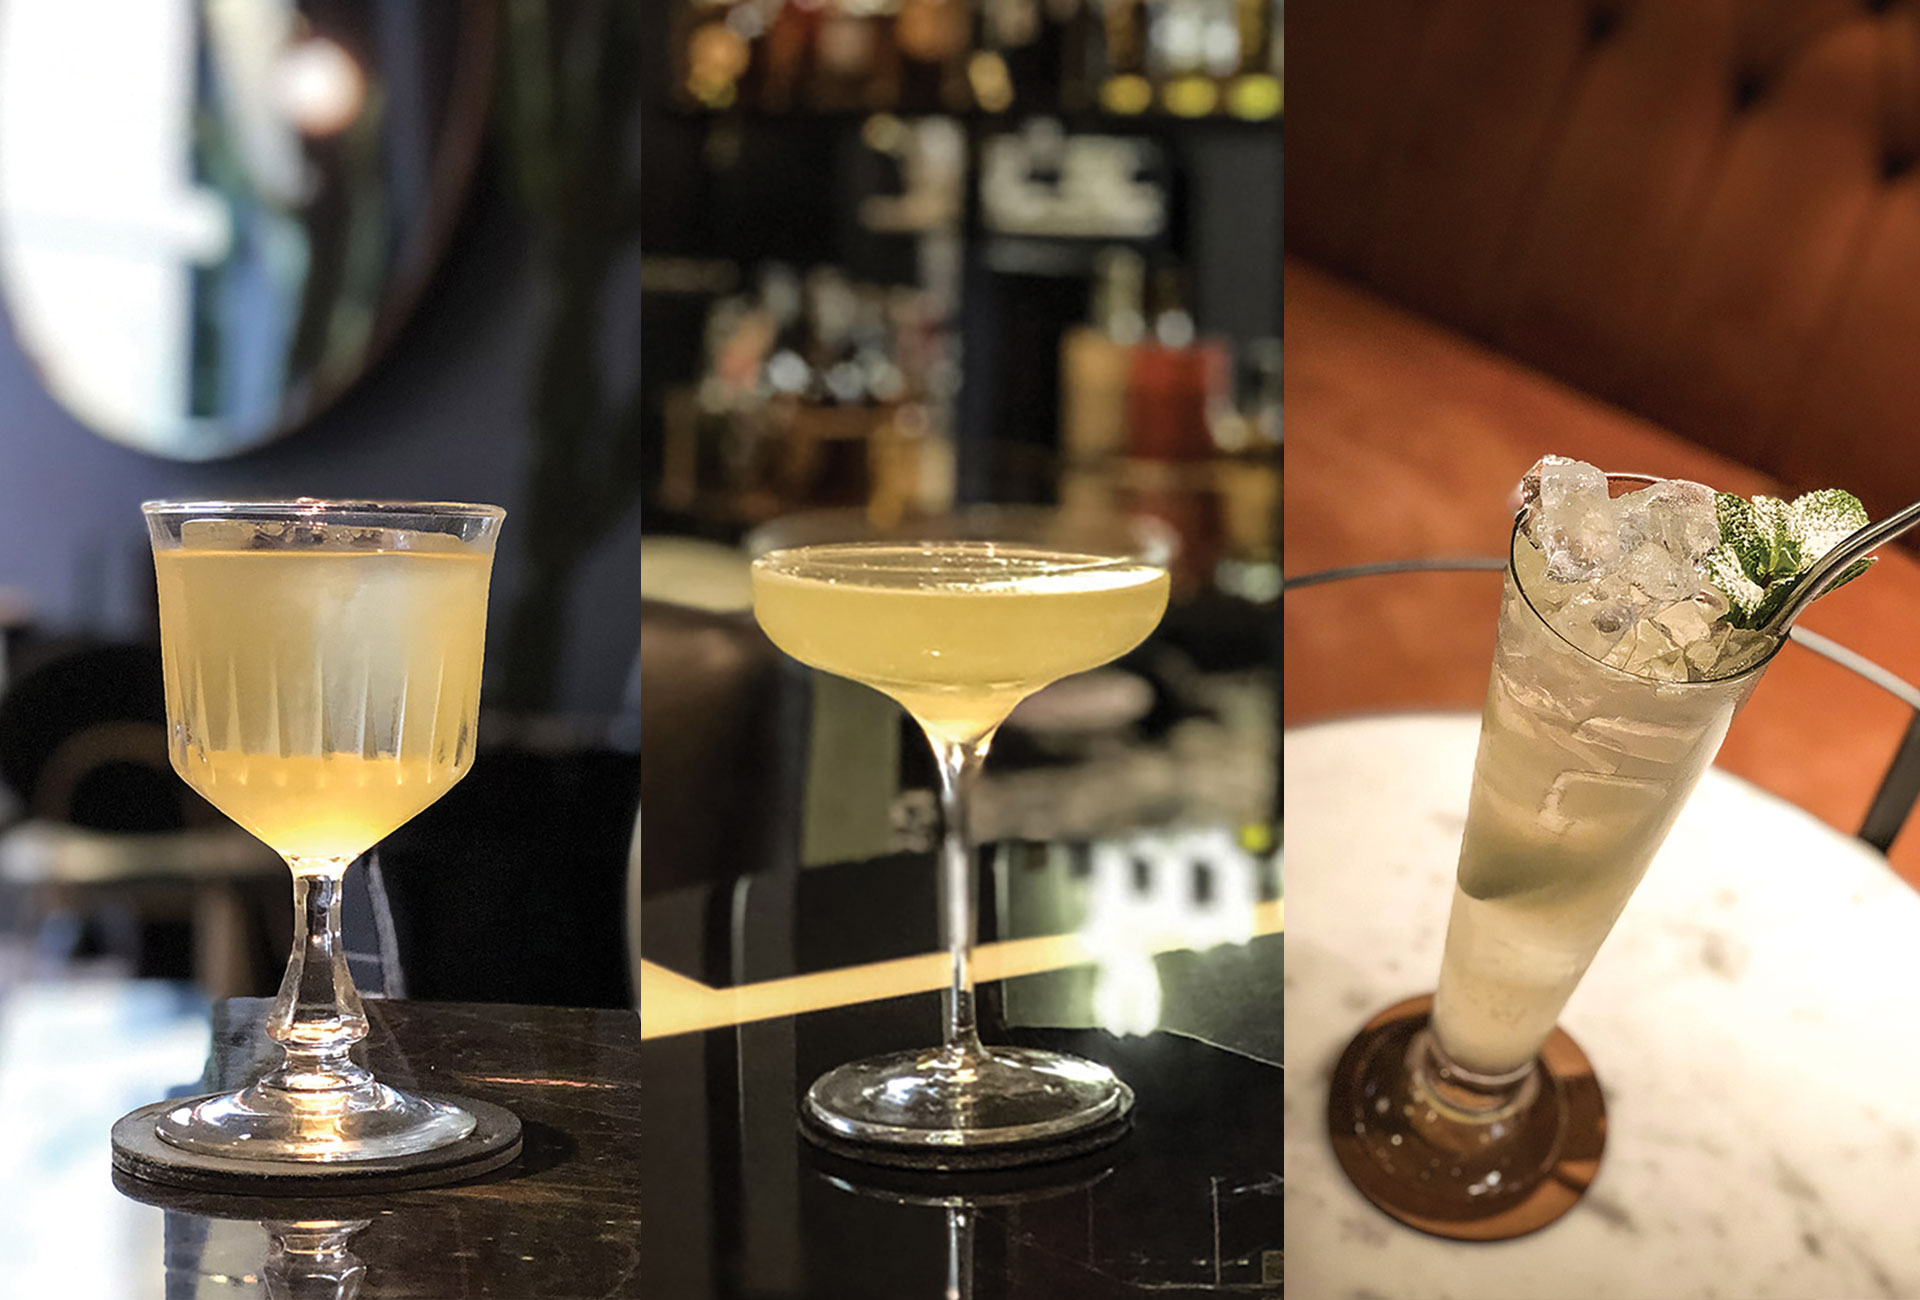 APPLE COCKTAILS ARE THE AUTUMN TREND AT THE BAXTER BAR